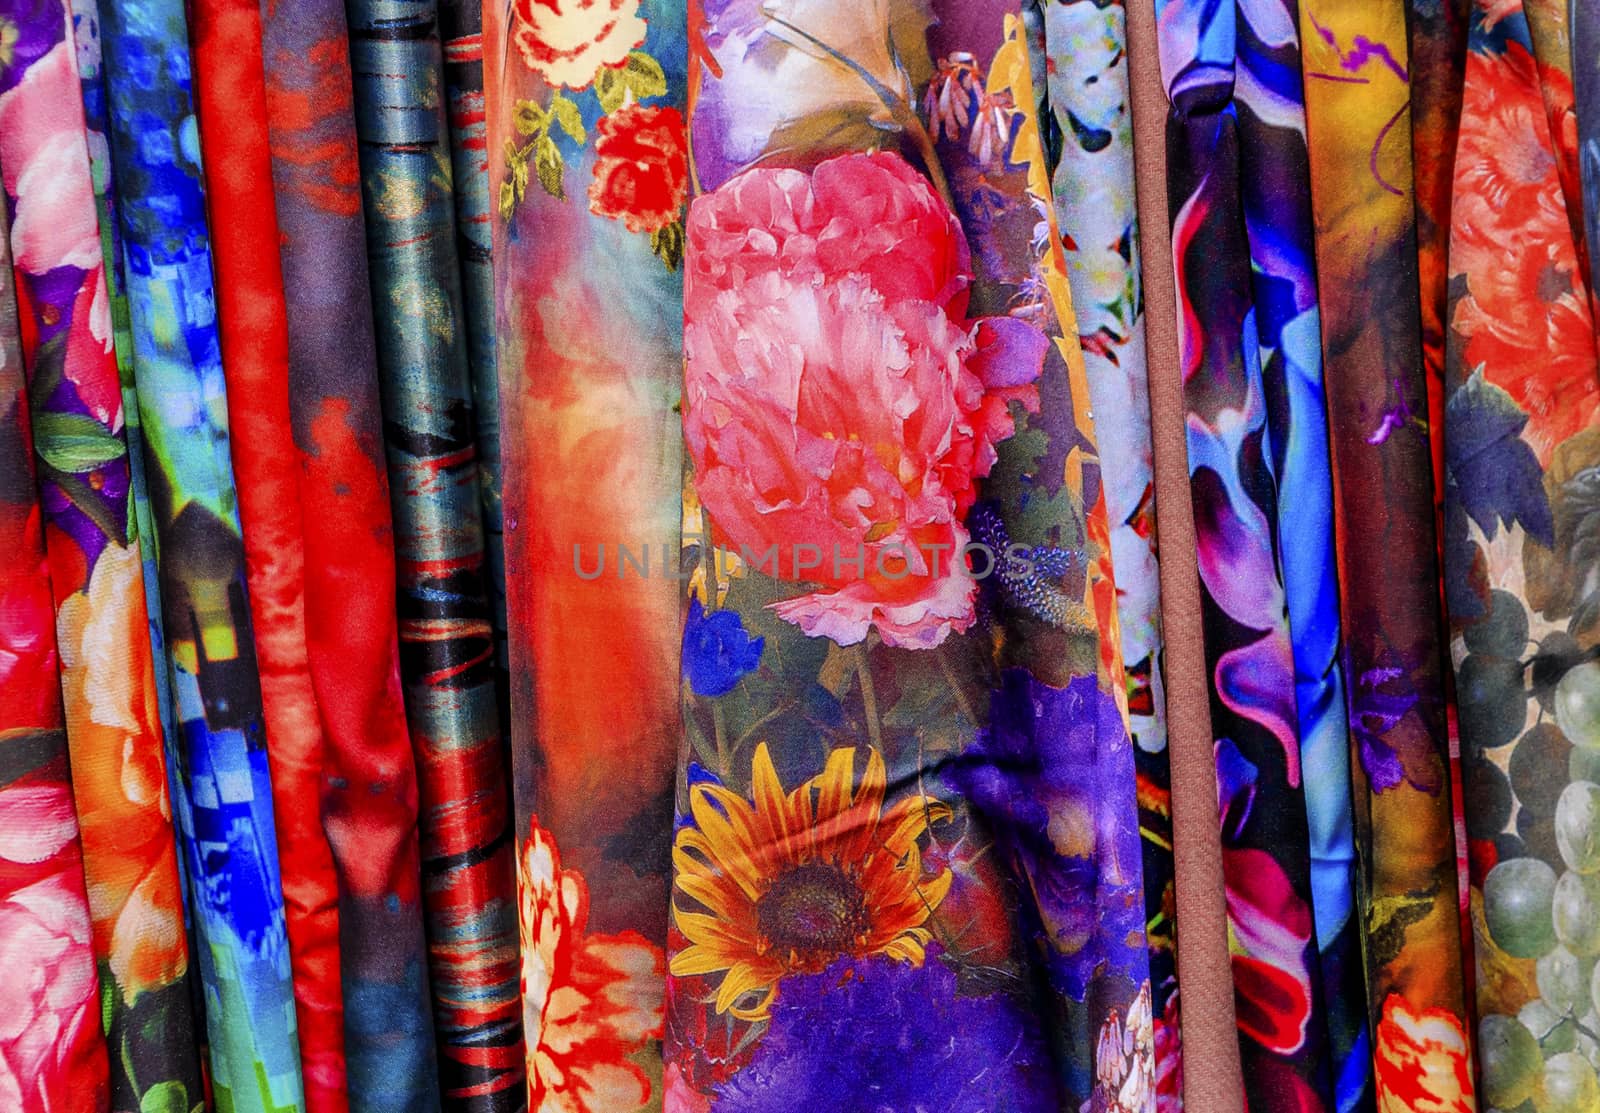 Chinese Colorful Flower Silk Scarves Yuyuan Shanghai China by bill_perry